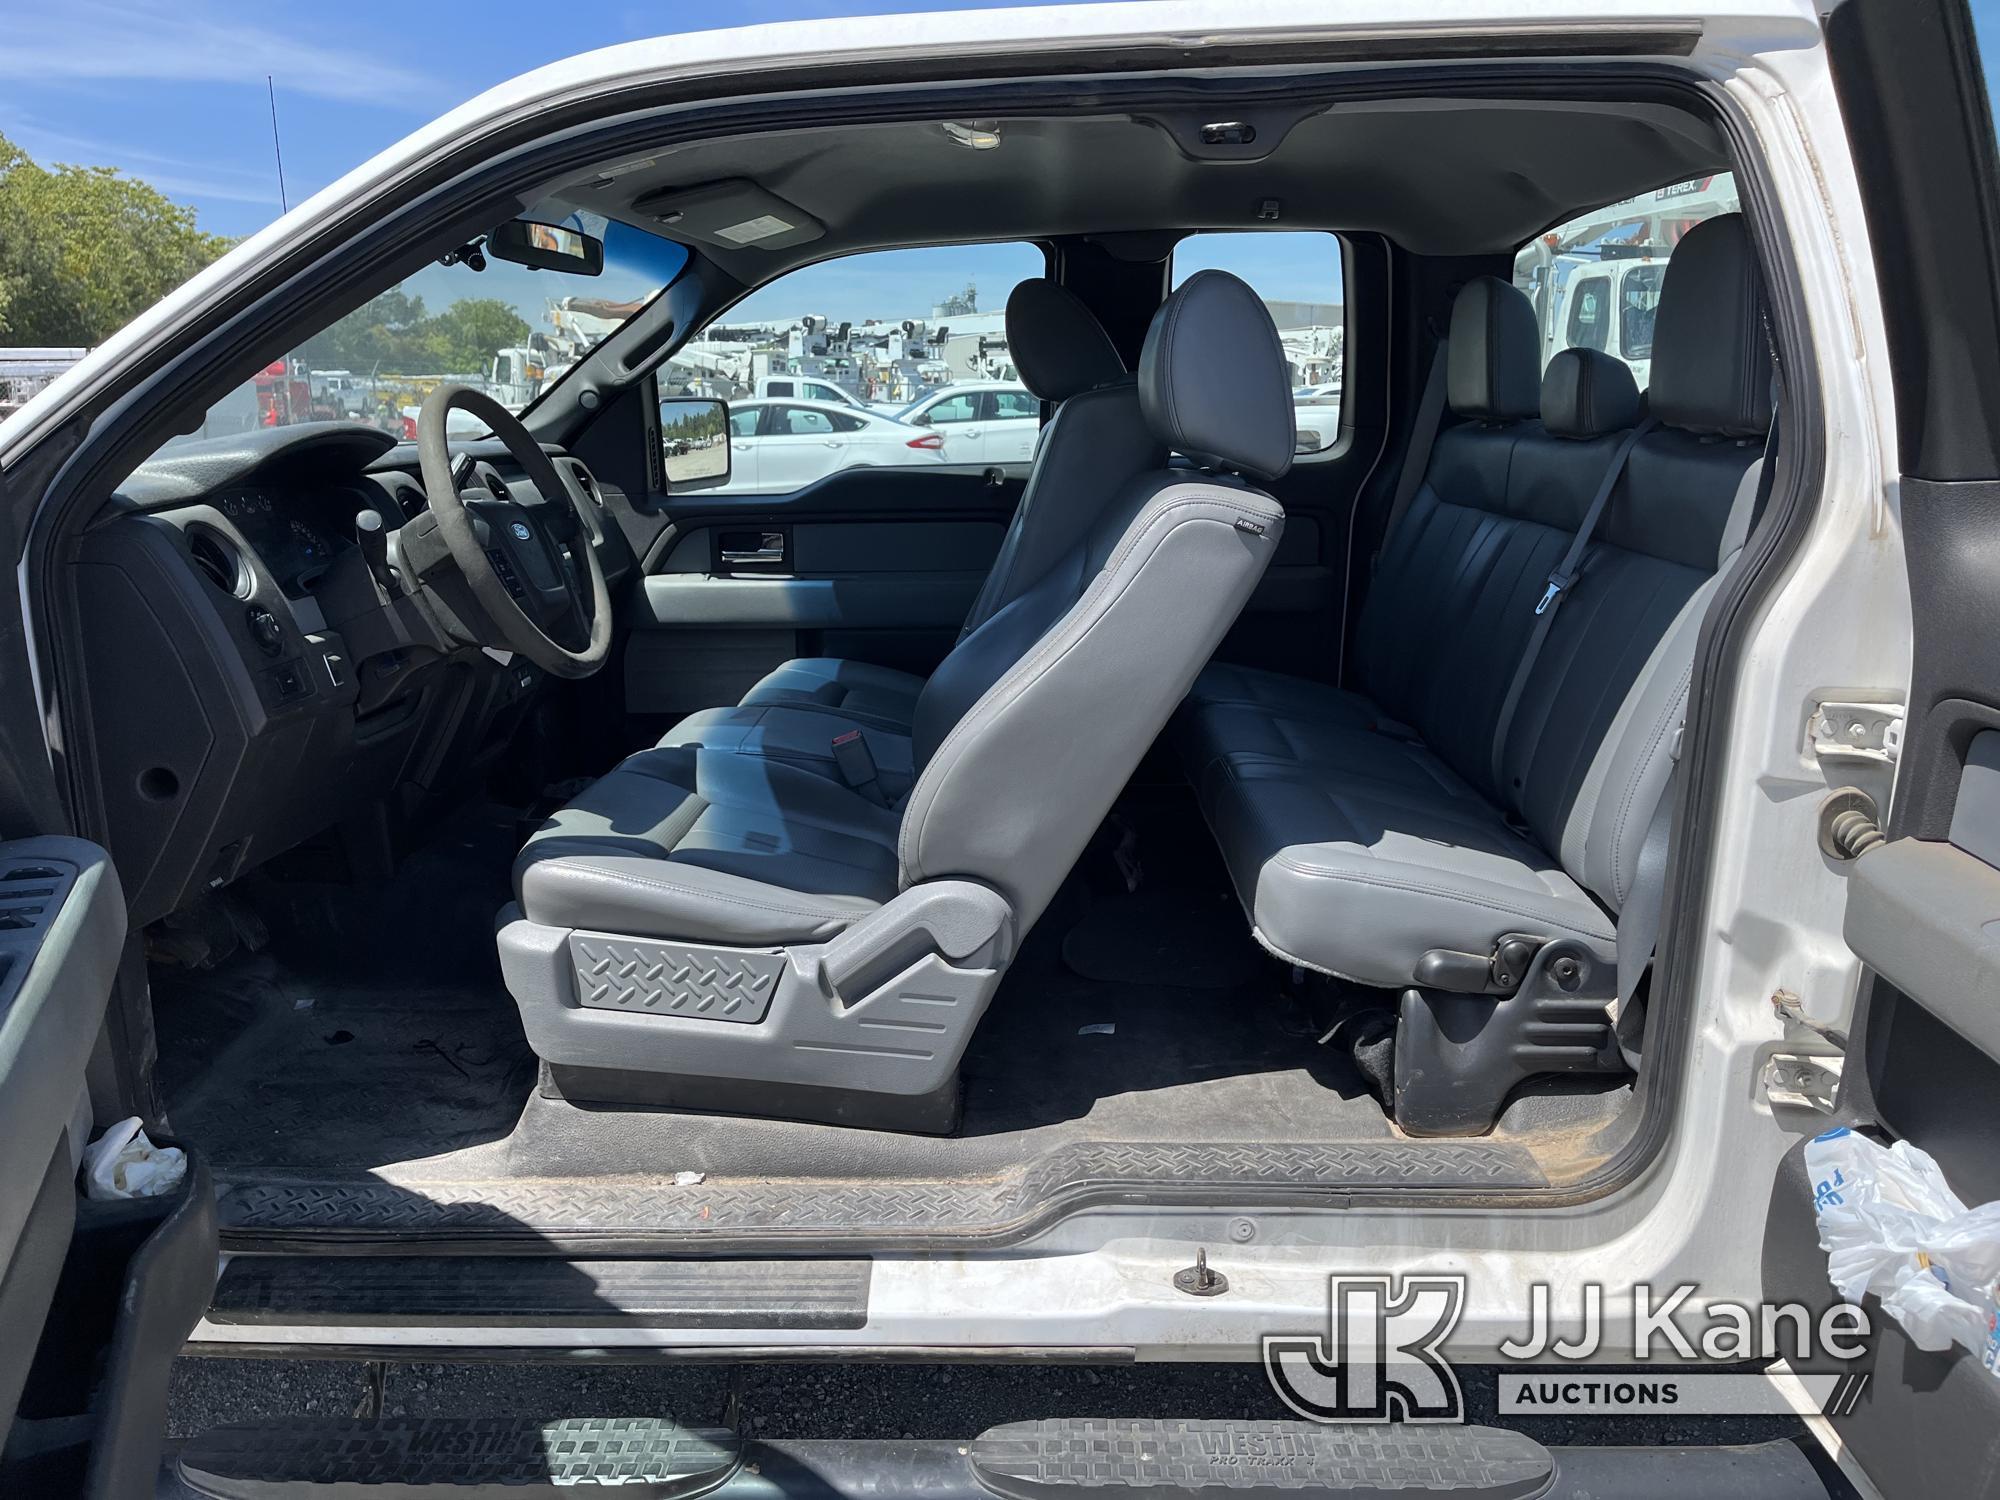 (Chester, VA) 2013 Ford F150 4x4 Extended-Cab Pickup Truck Runs & Moves